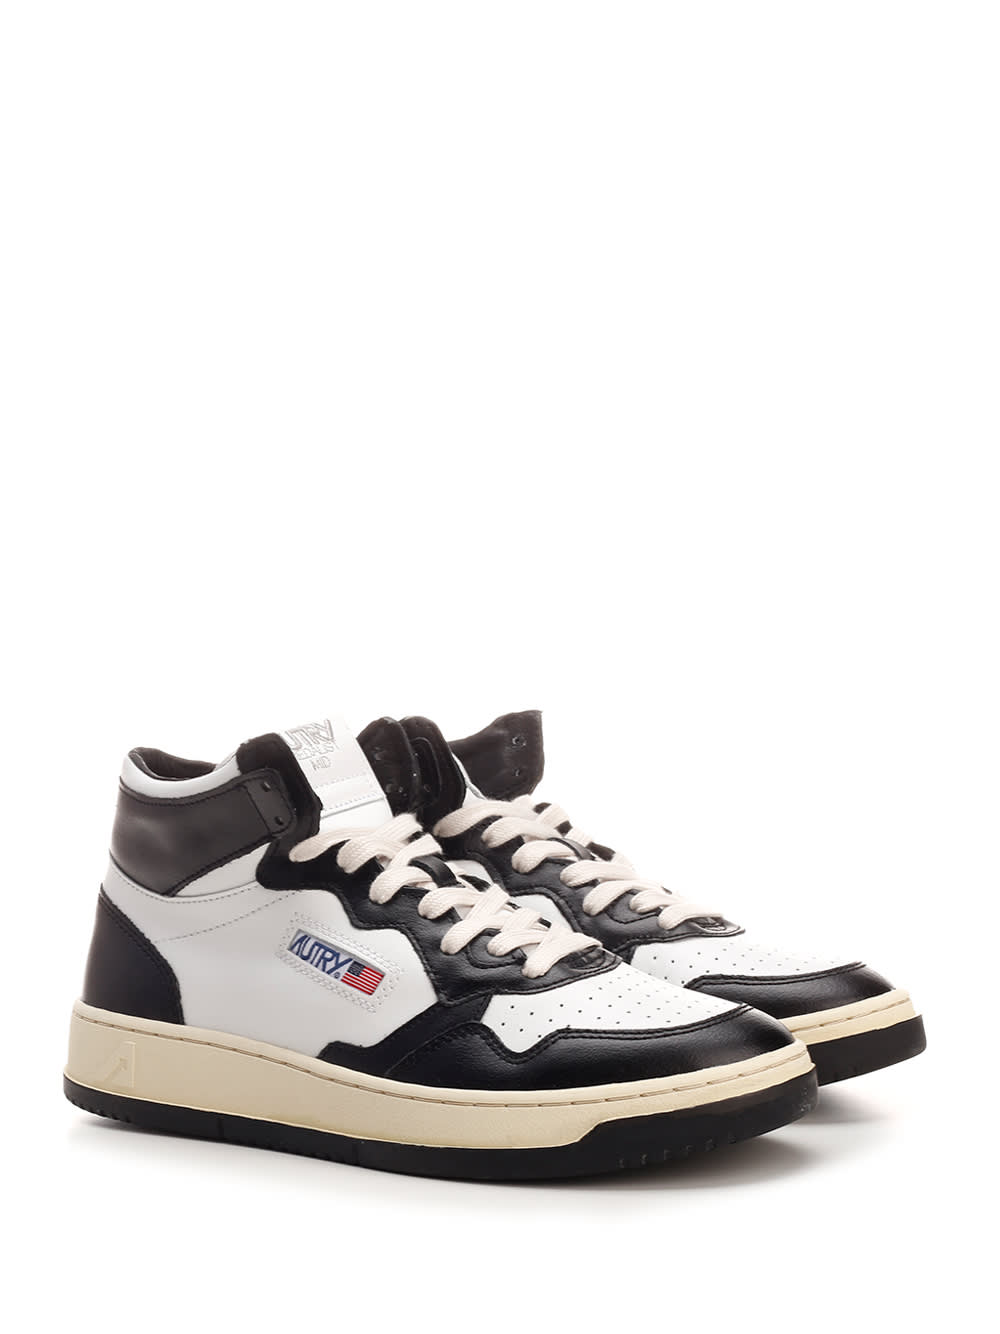 Shop Autry Black/white Medalist High-top Sneakers